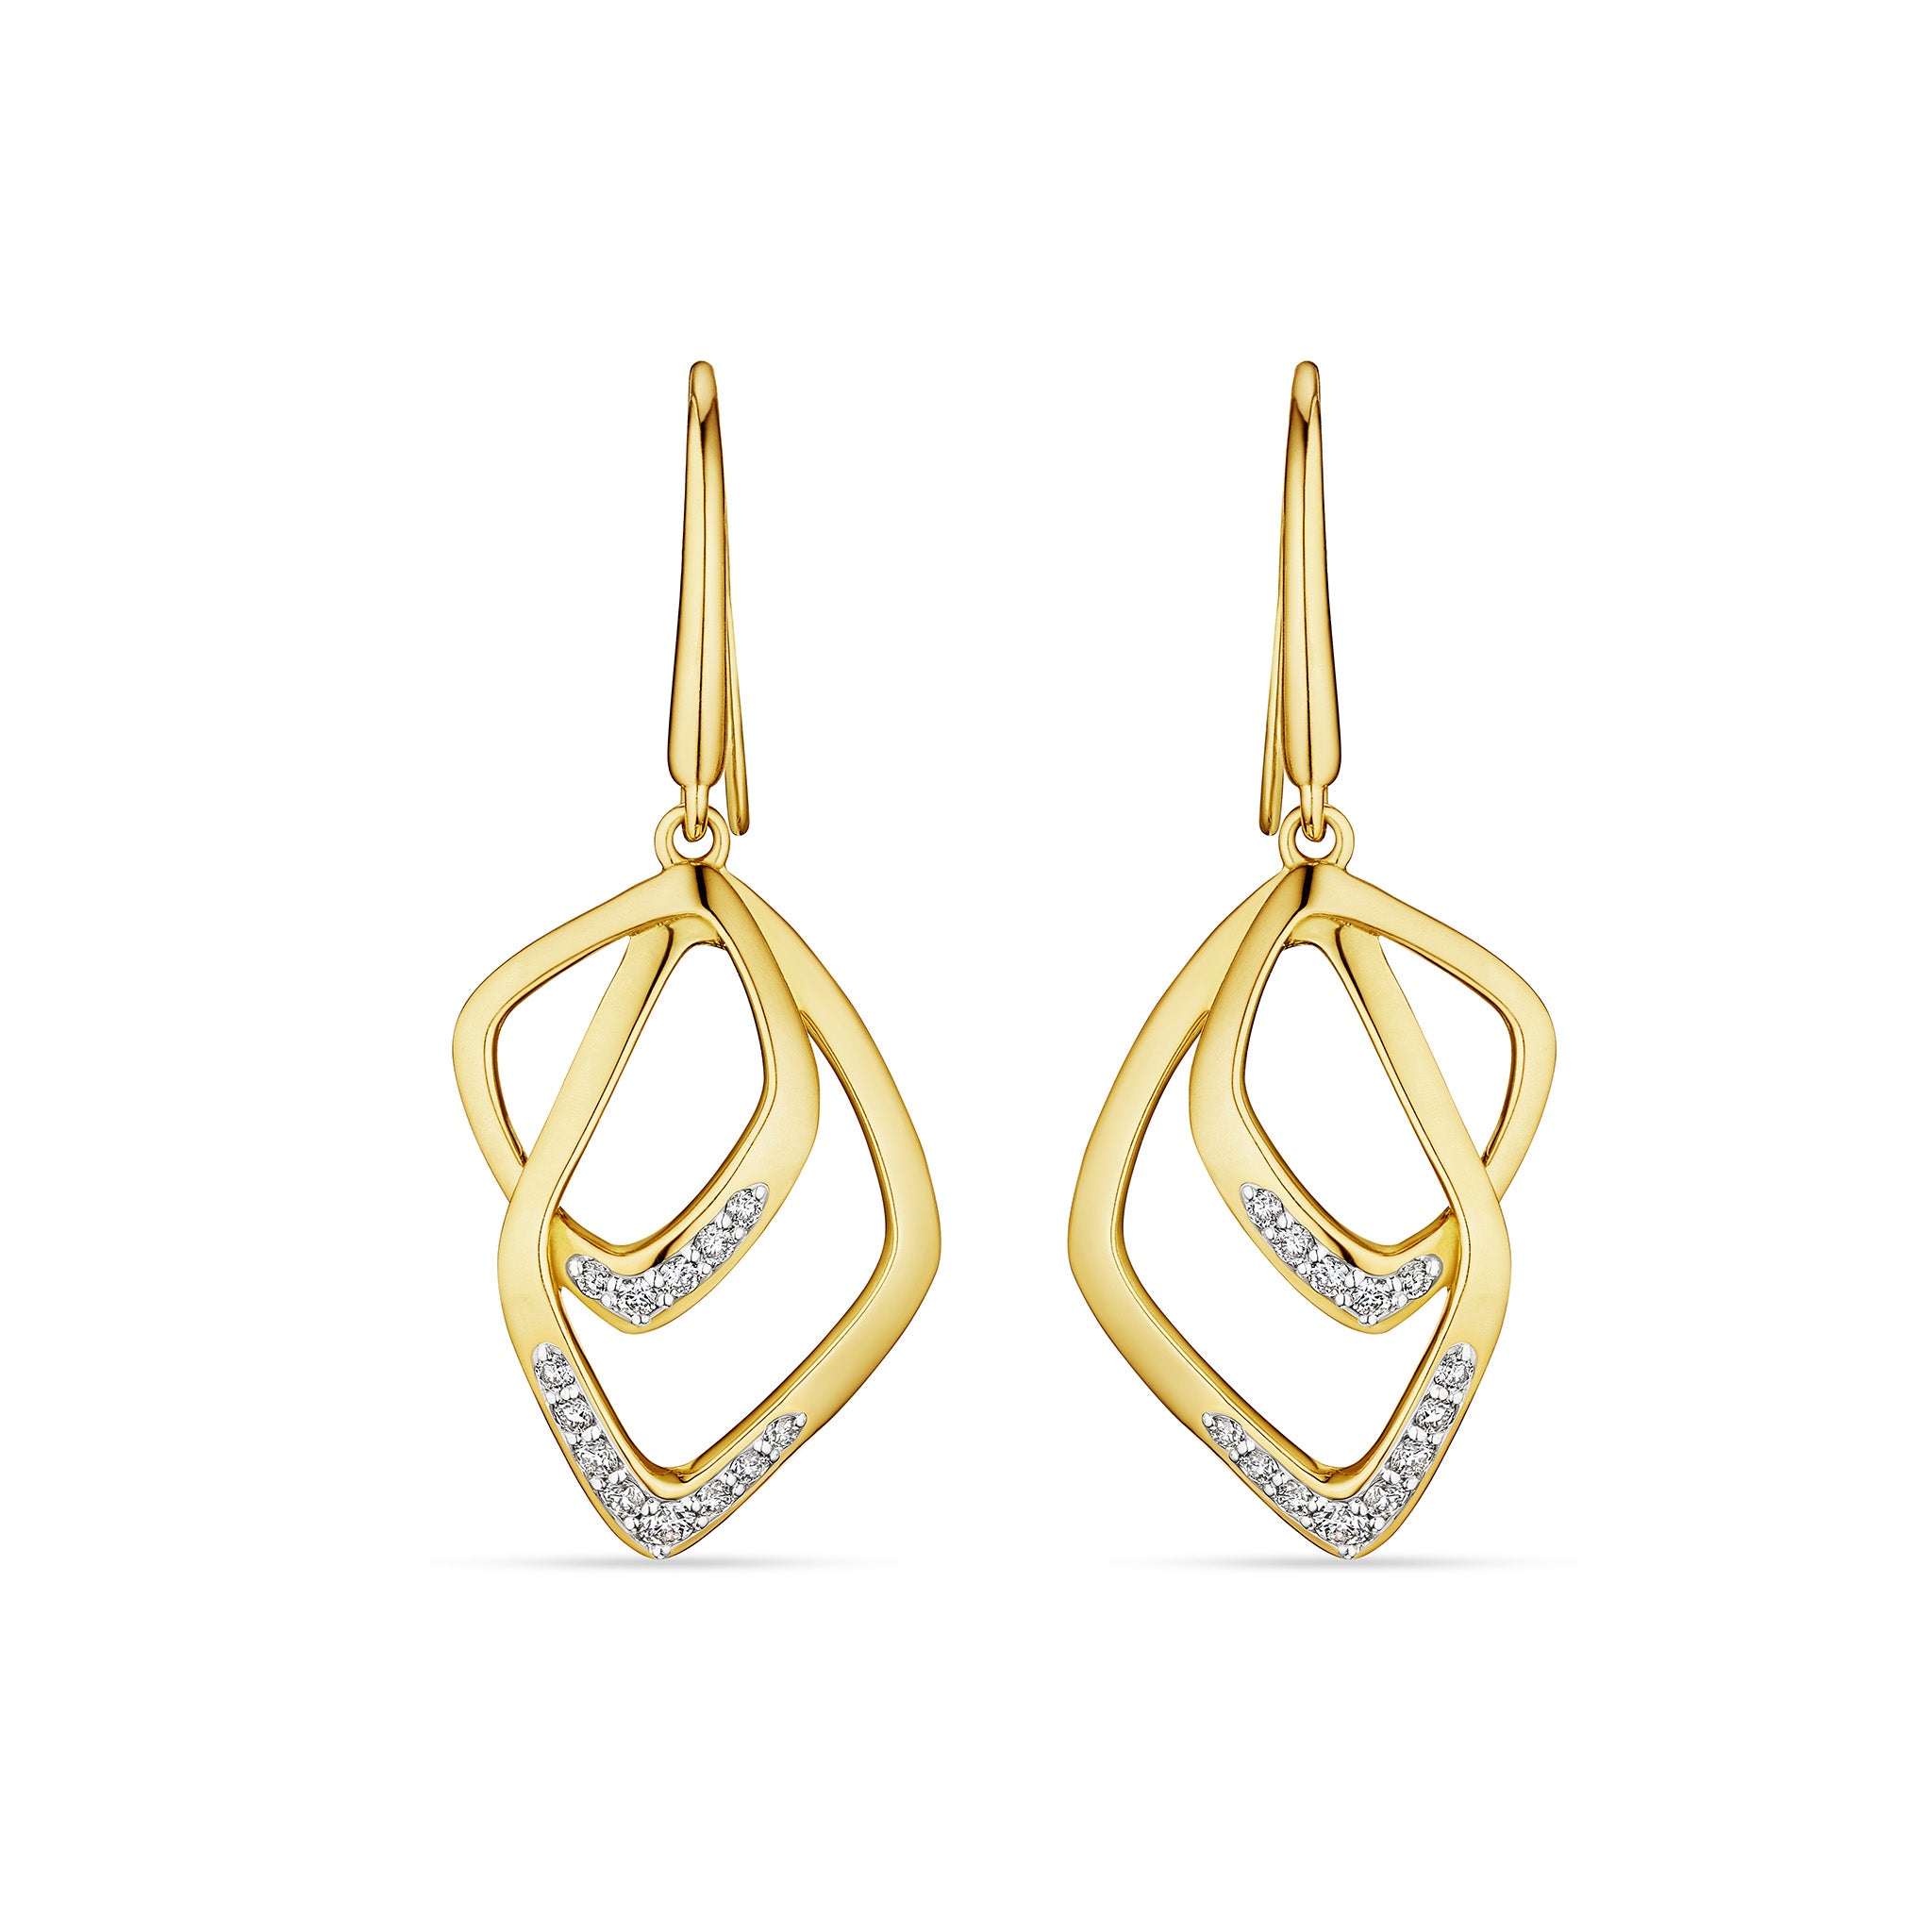 Selvaggia Drop Earrings with Diamonds in 14K